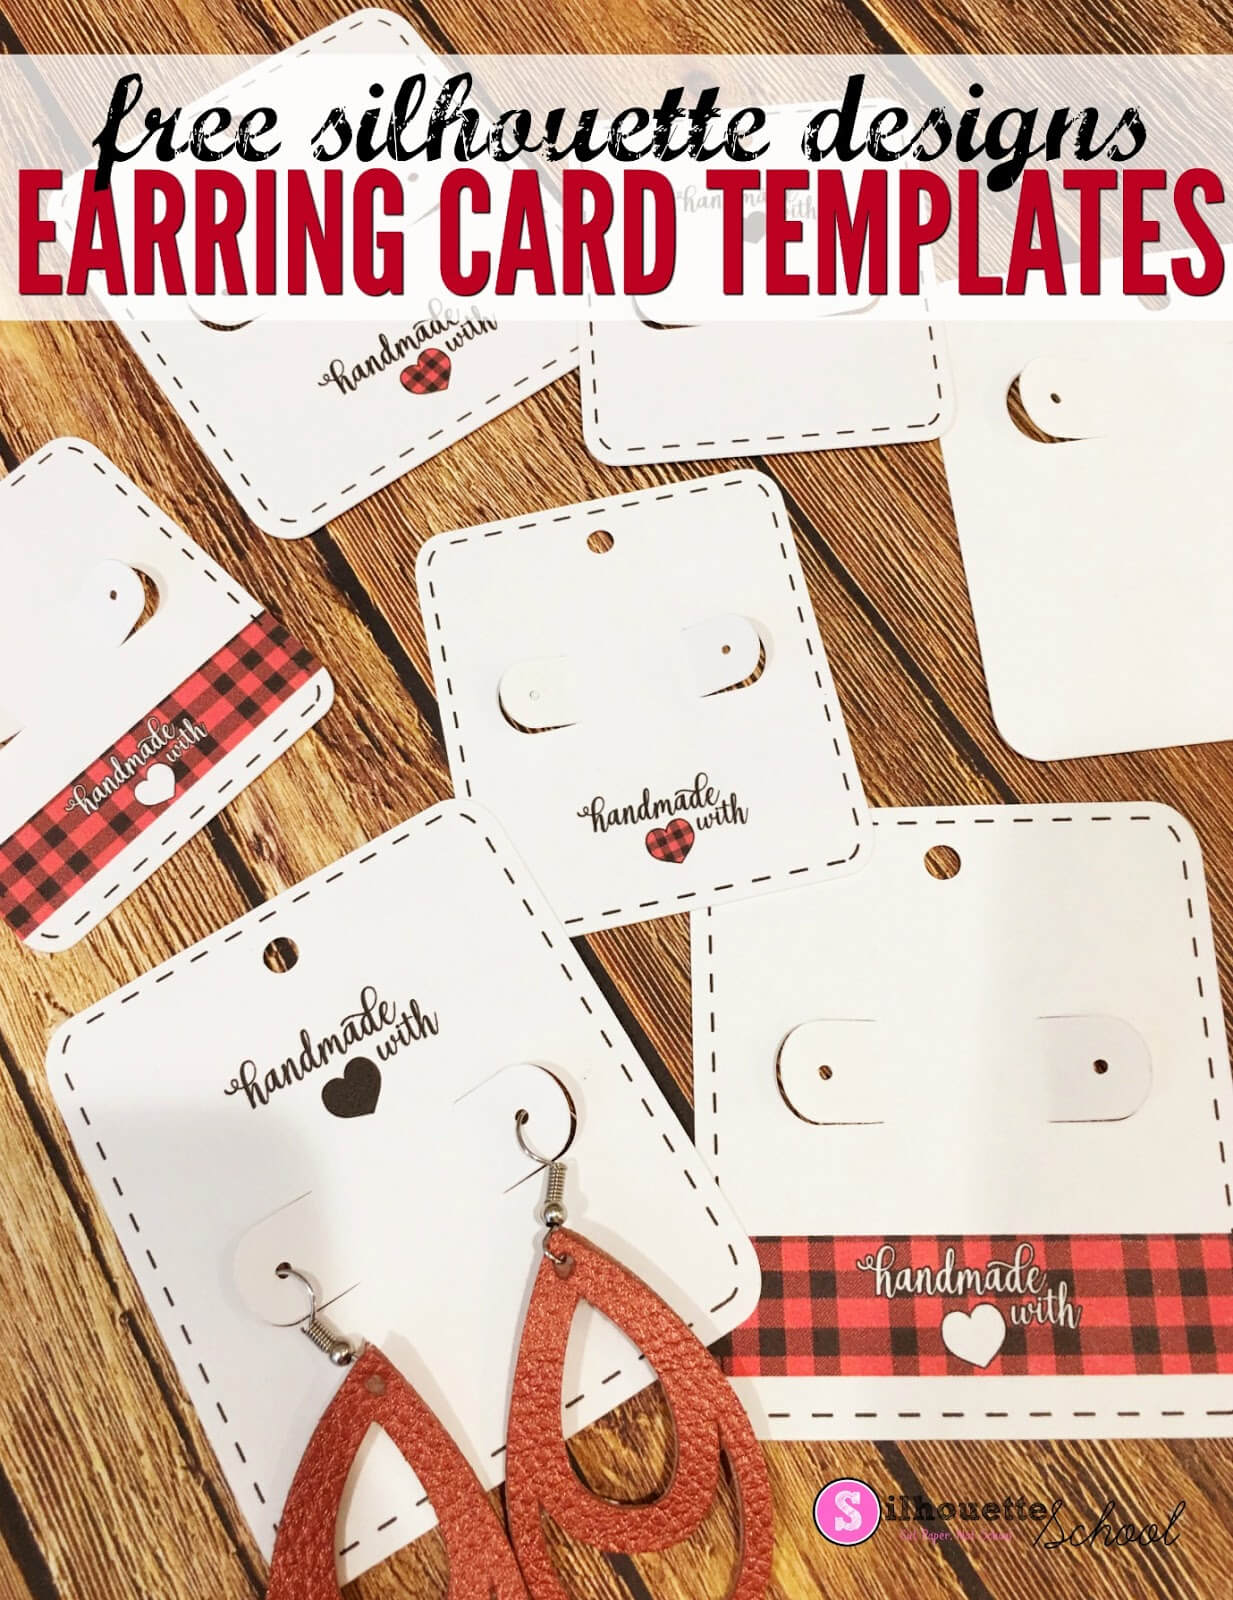 Free Silhouette Earring Card Templates (Set Of 8 Regarding Silhouette Cameo Card Templates